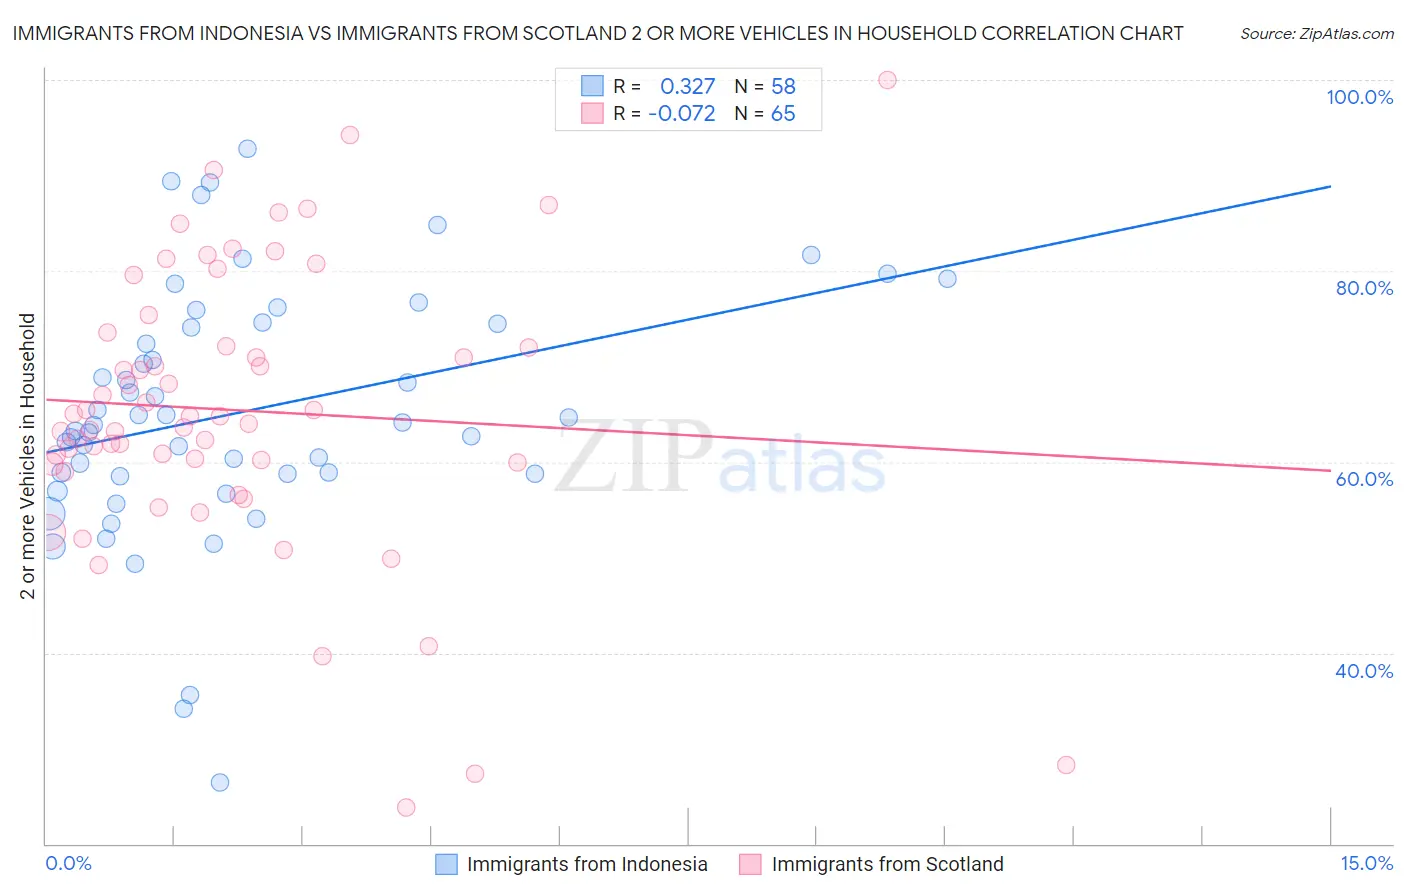 Immigrants from Indonesia vs Immigrants from Scotland 2 or more Vehicles in Household